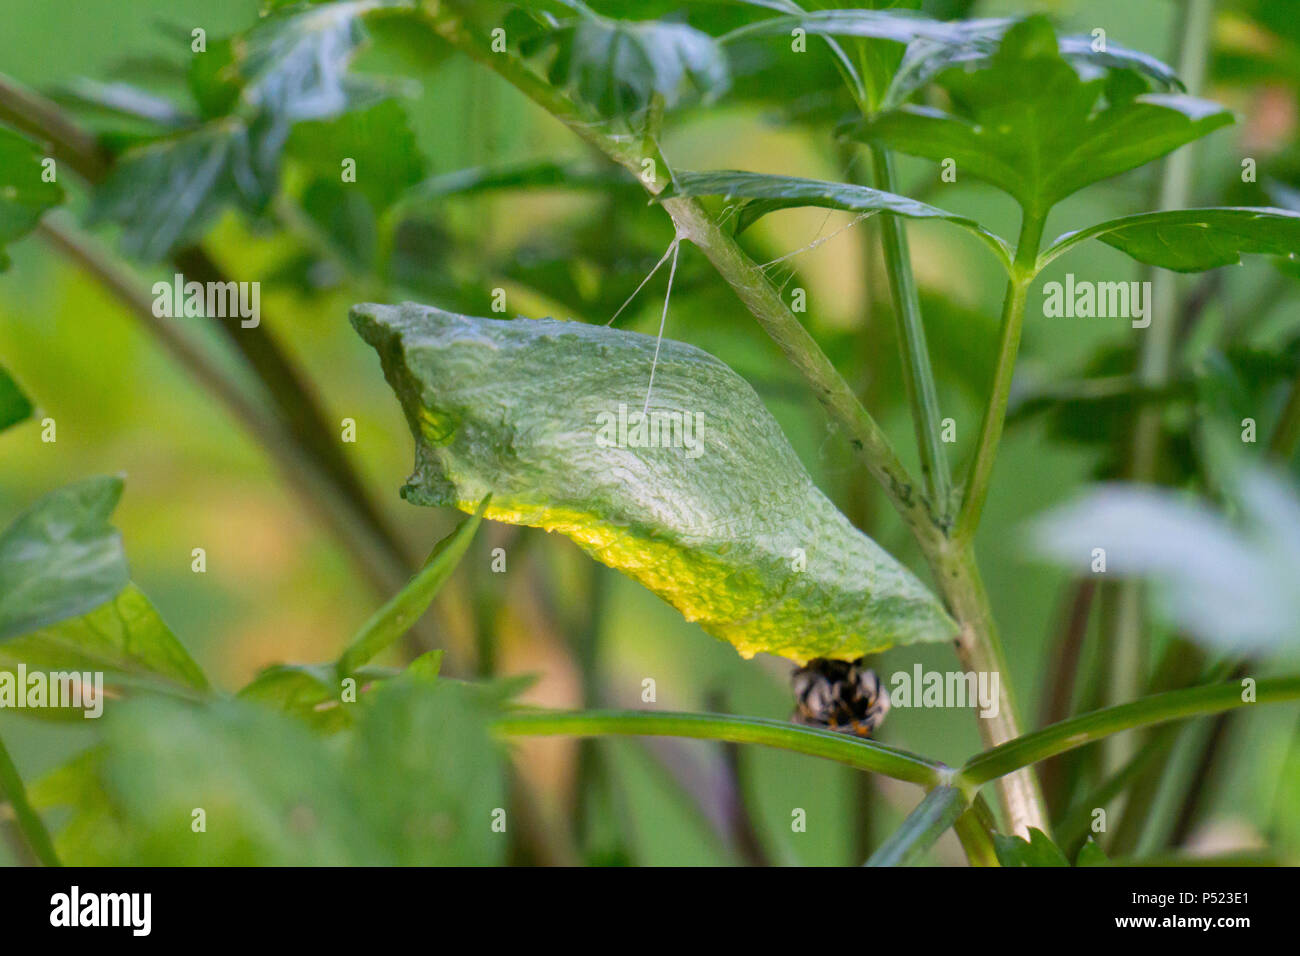 Black Swallowtail chrysalis (Papilio polyxenes) hanging from a parsley stem Stock Photo